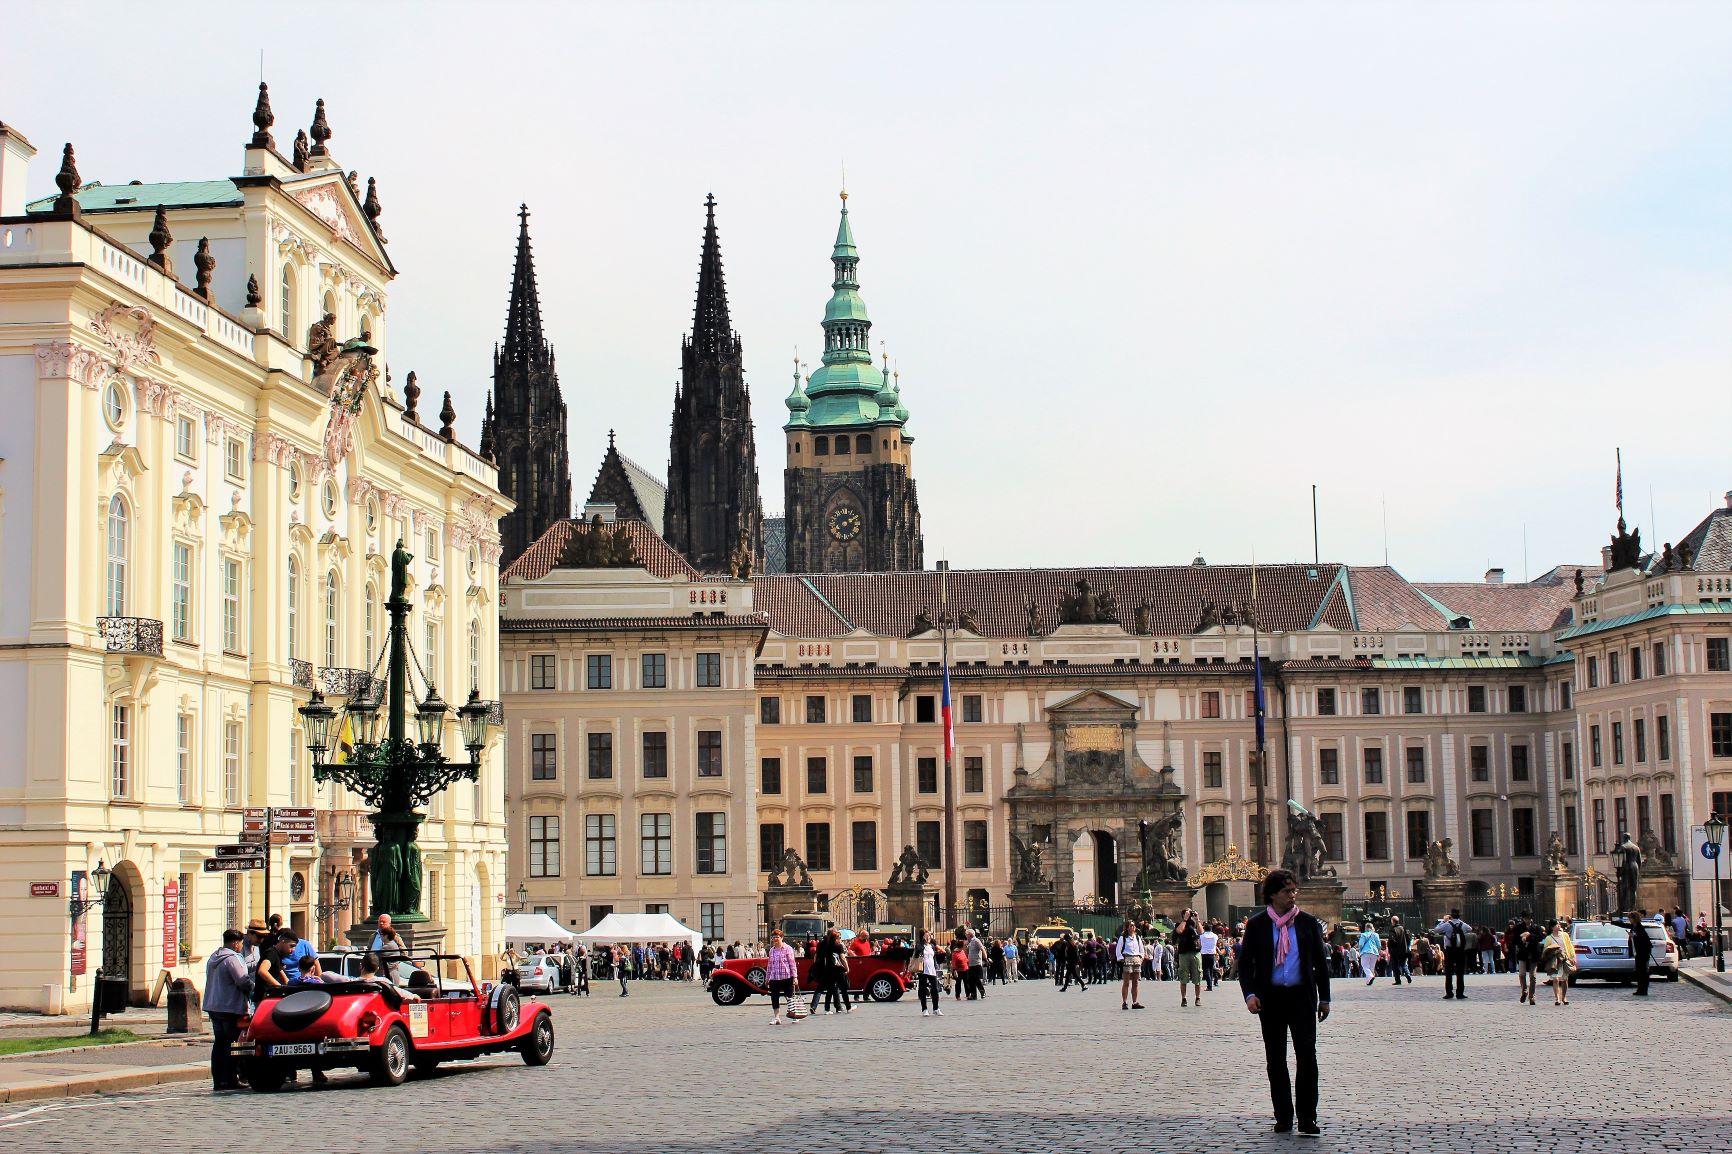 The Hradčany Square was based on an independent borough until 1784, and because this area is located beside Prague Castle, it long held the status of being a ‘royal town’. Prague, Czech Republic.